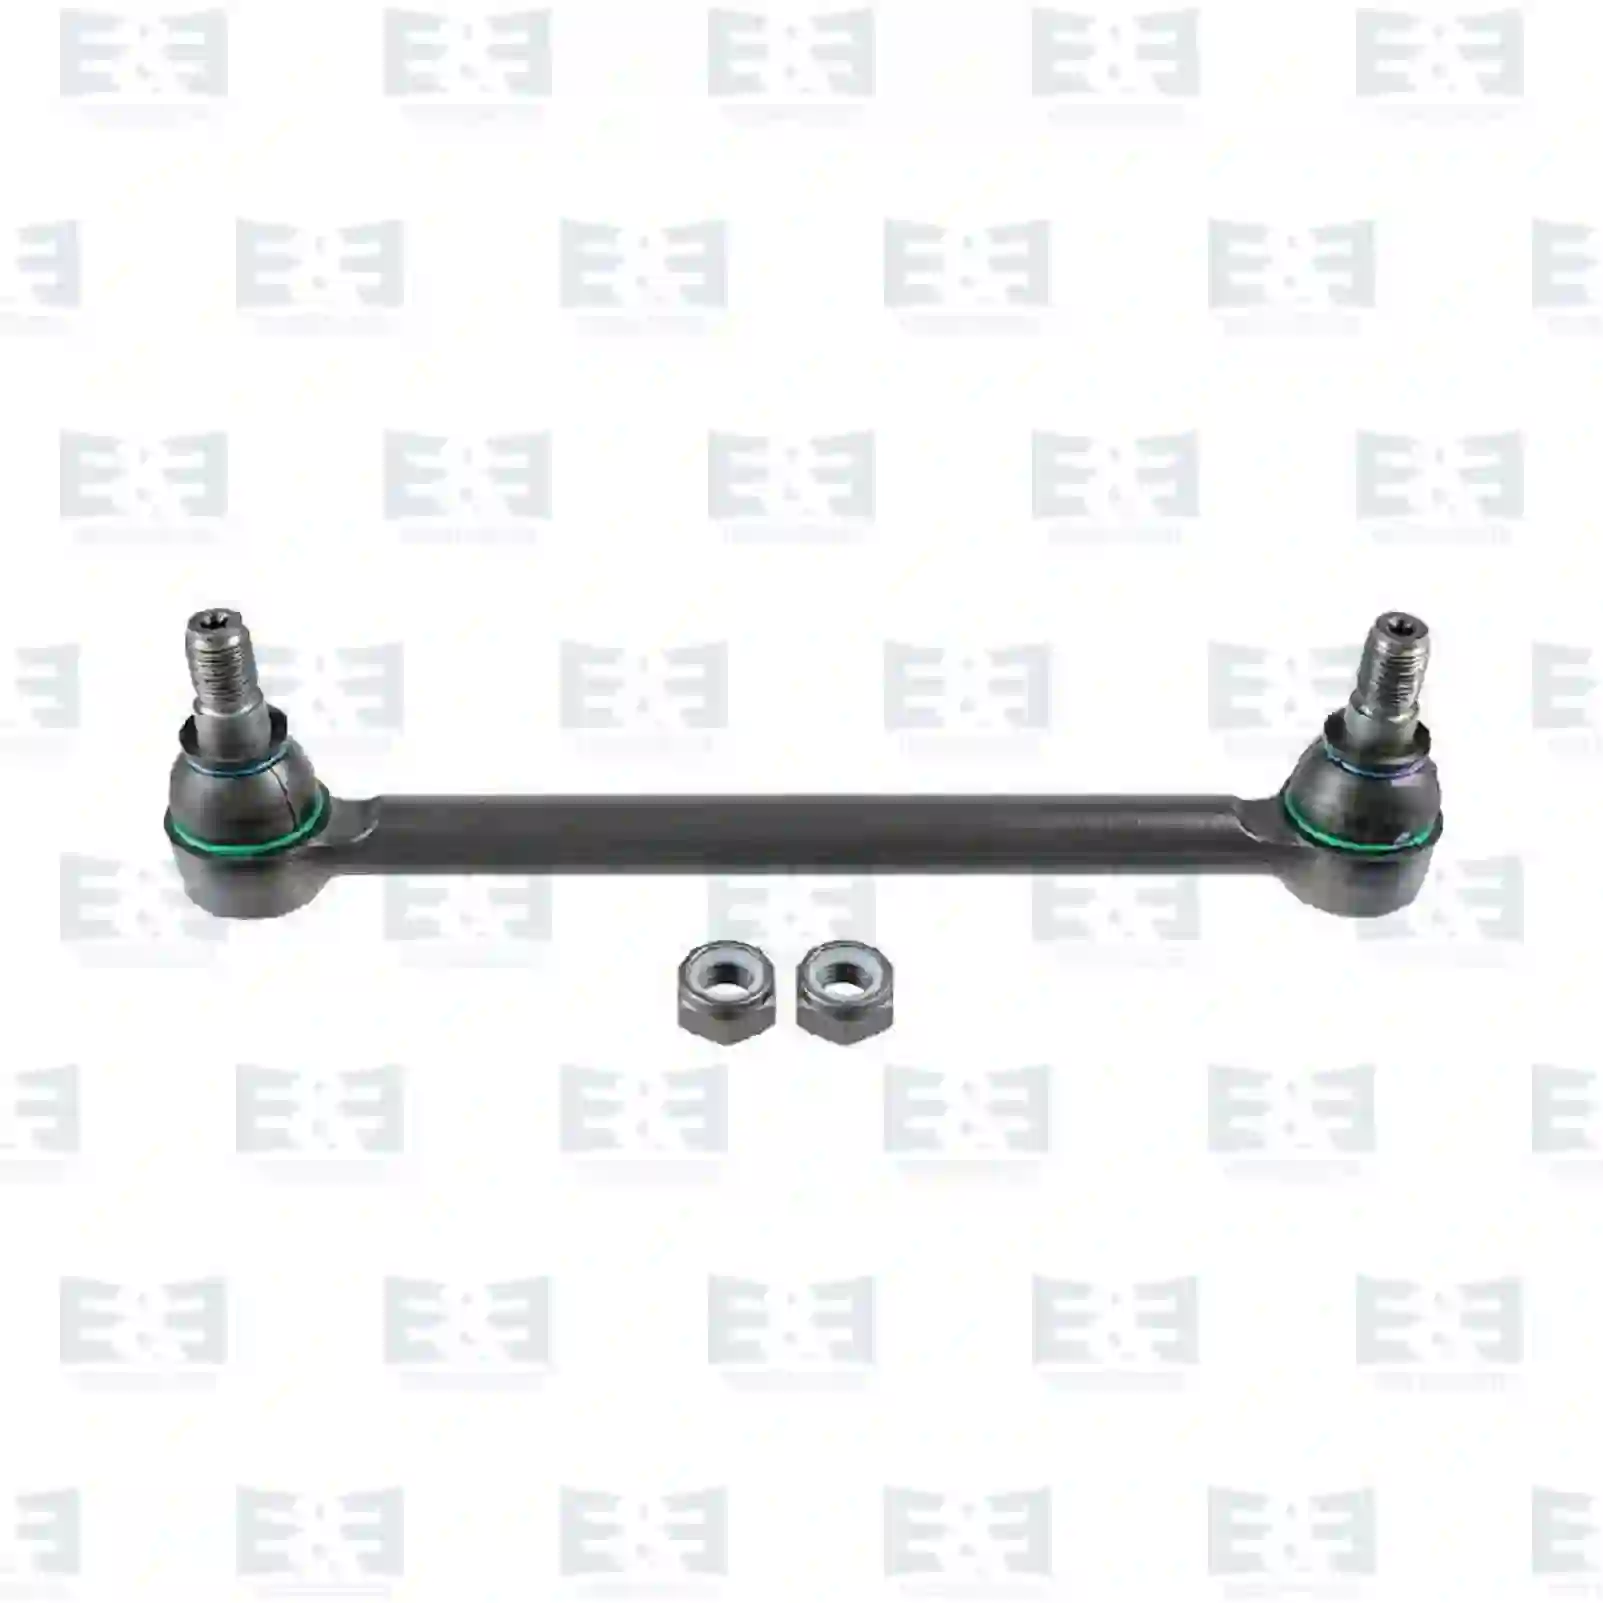 Anti-Roll Bar Stabilizer stay, EE No 2E2283845 ,  oem no:7421446333, 7422325247, 21446333, 22325247, ZG41785-0008 E&E Truck Spare Parts | Truck Spare Parts, Auotomotive Spare Parts